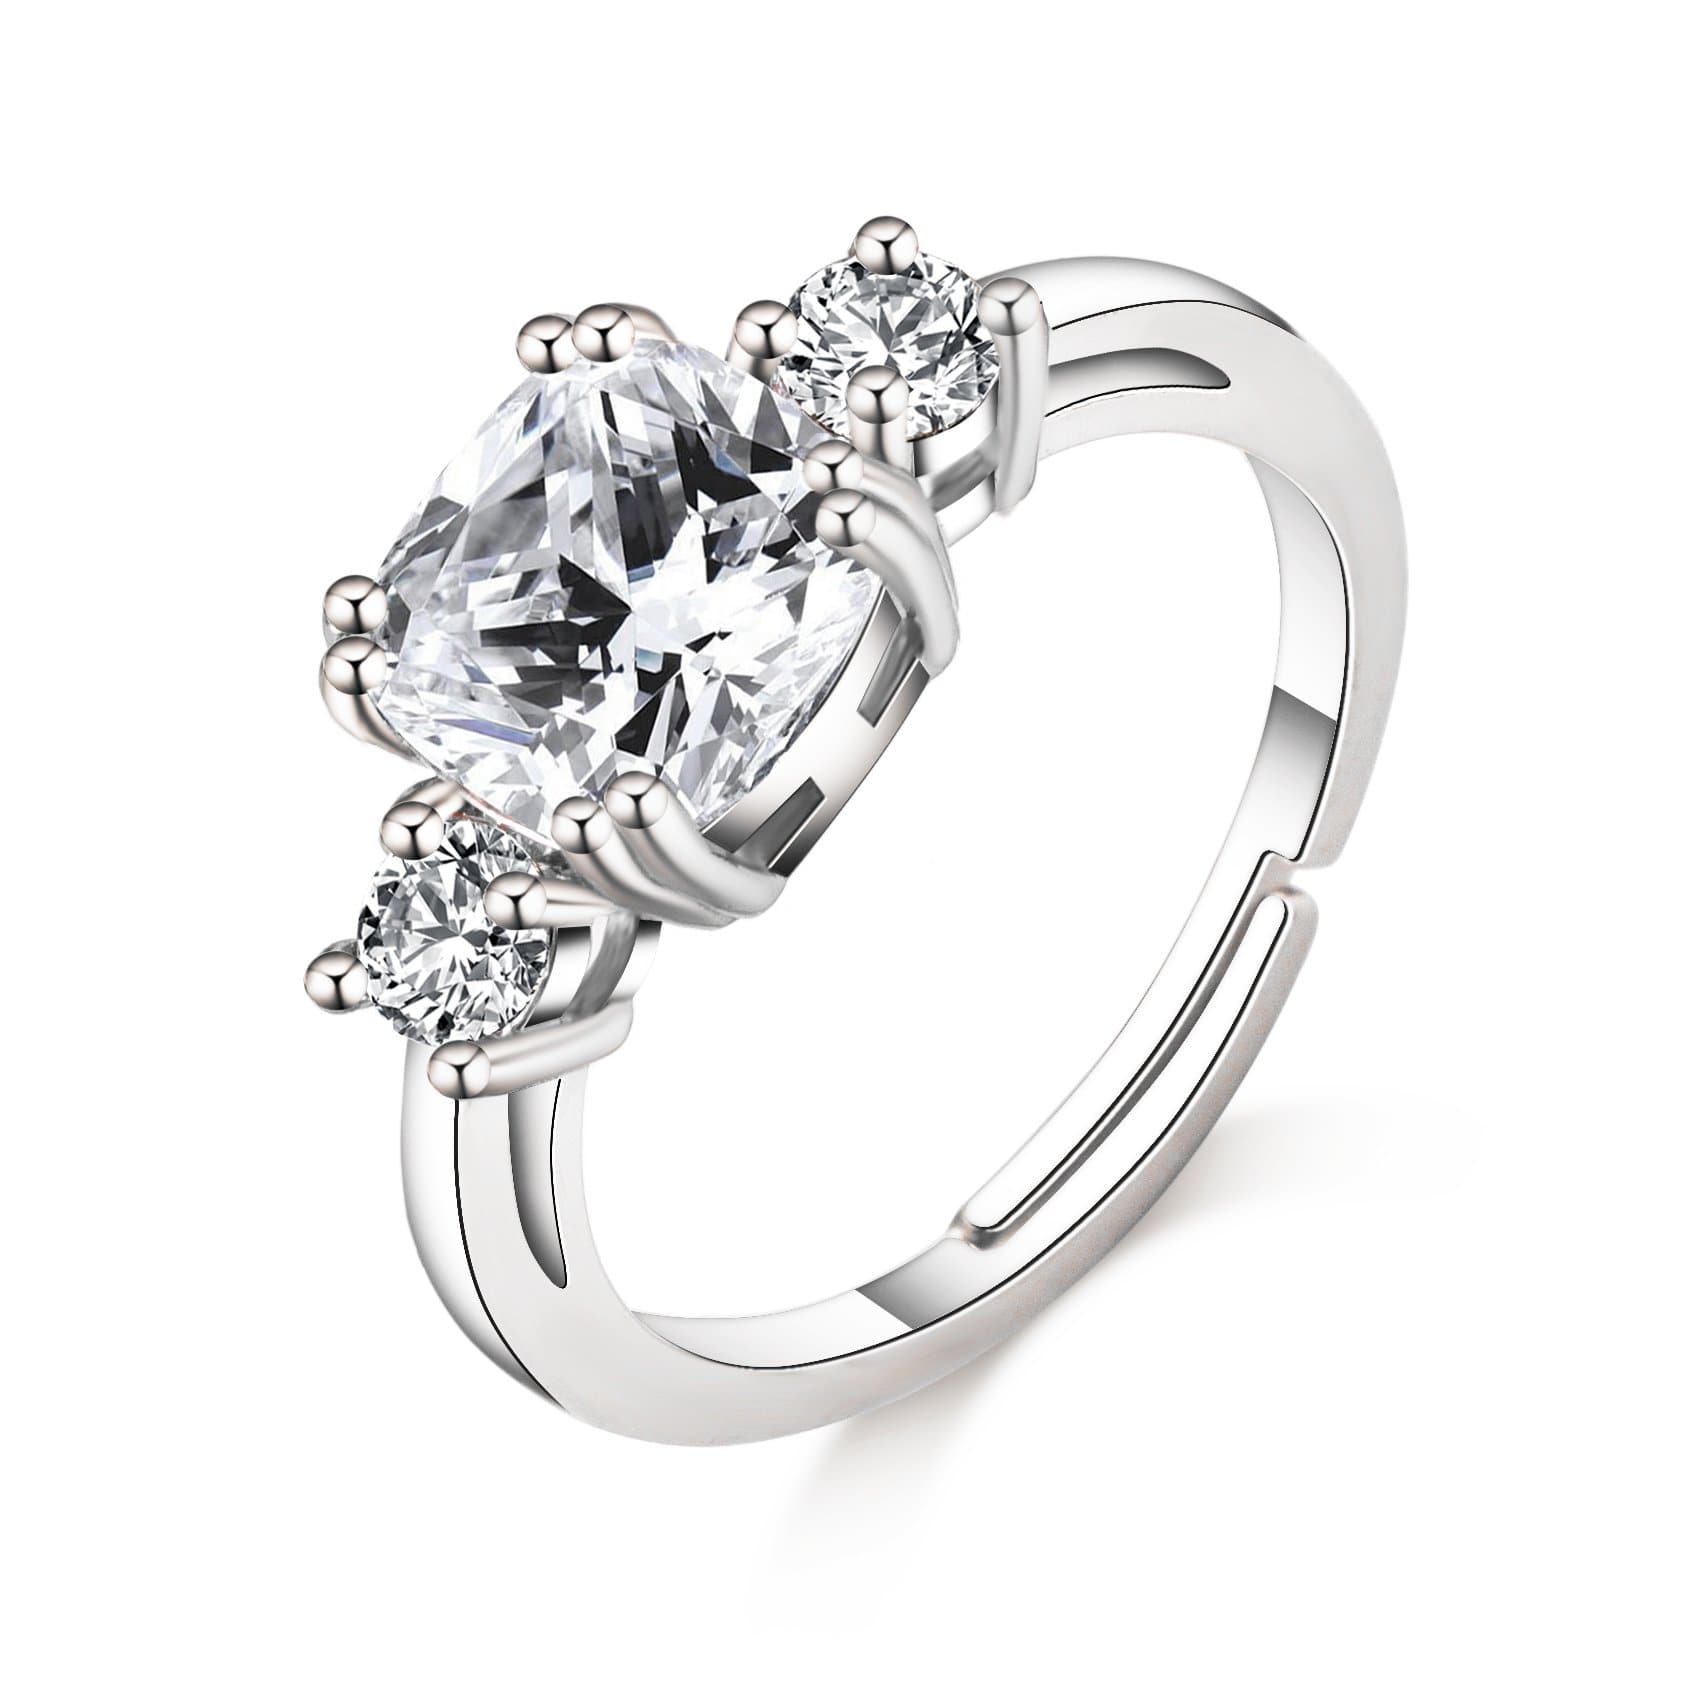 Silver Plated Three Stone Ring Created with Zircondia® Crystals by Philip Jones Jewellery